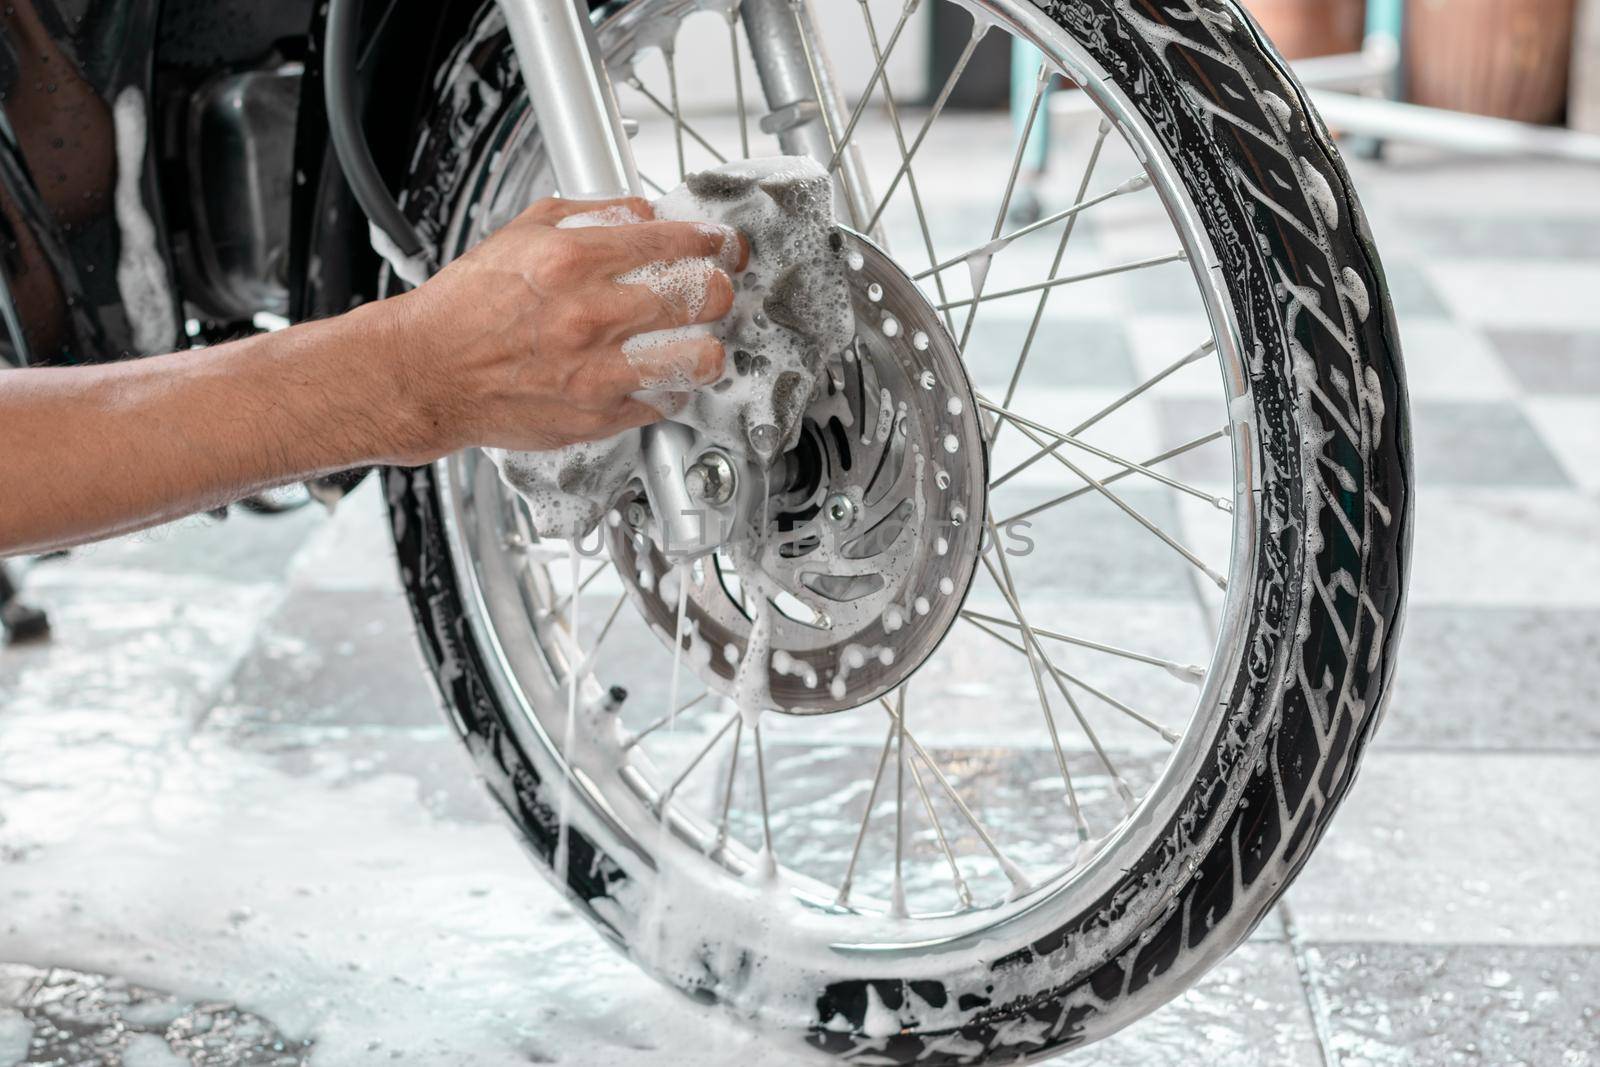 Close-up of a man's hand washing a motorbike's wheels with sponges and bubbles.